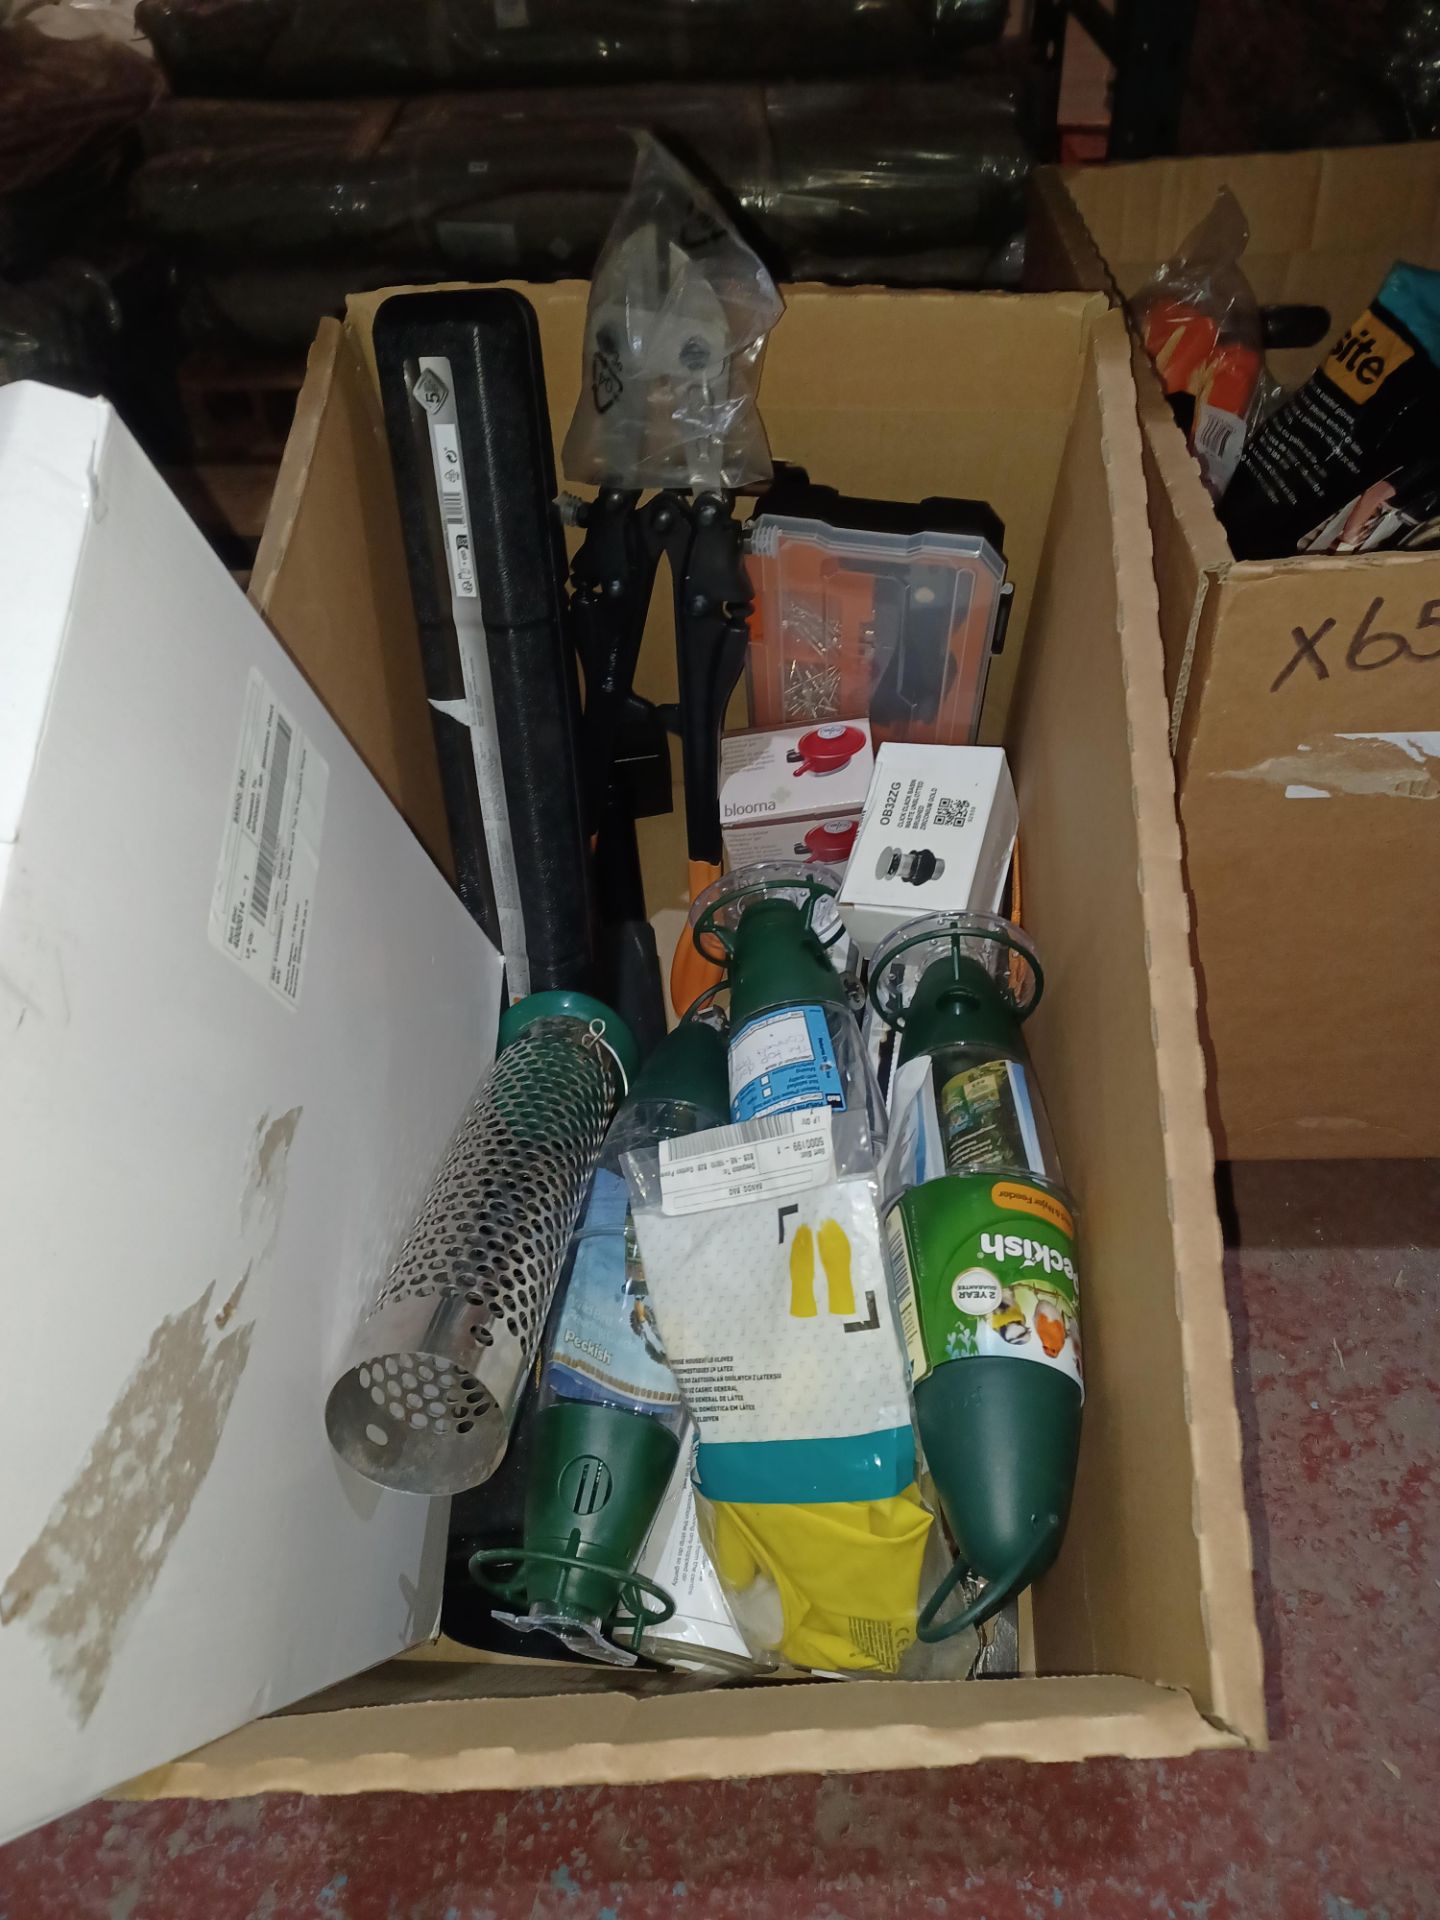 25 x Mixed Tools Lot to include; Basin Waste, Gloves, Bird Feeders, Riveter Gun and more. - R13a.